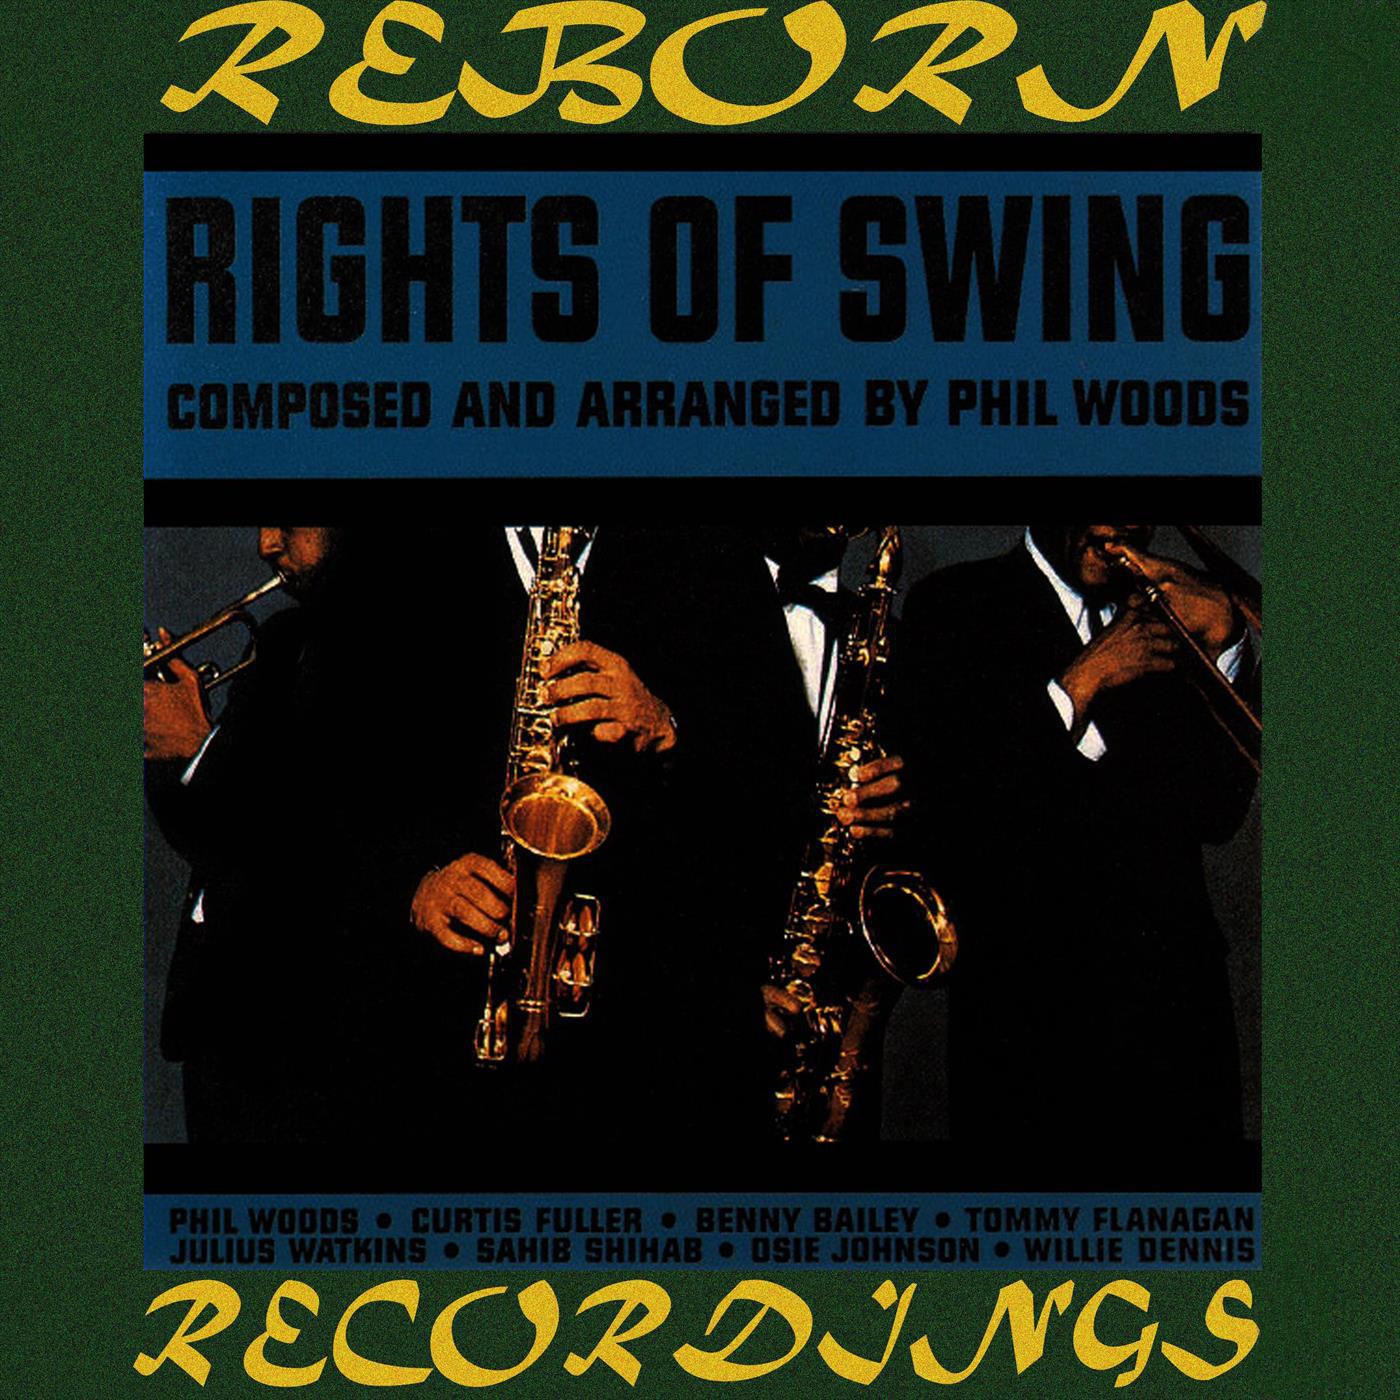 Rights of Swing (HD Remastered)